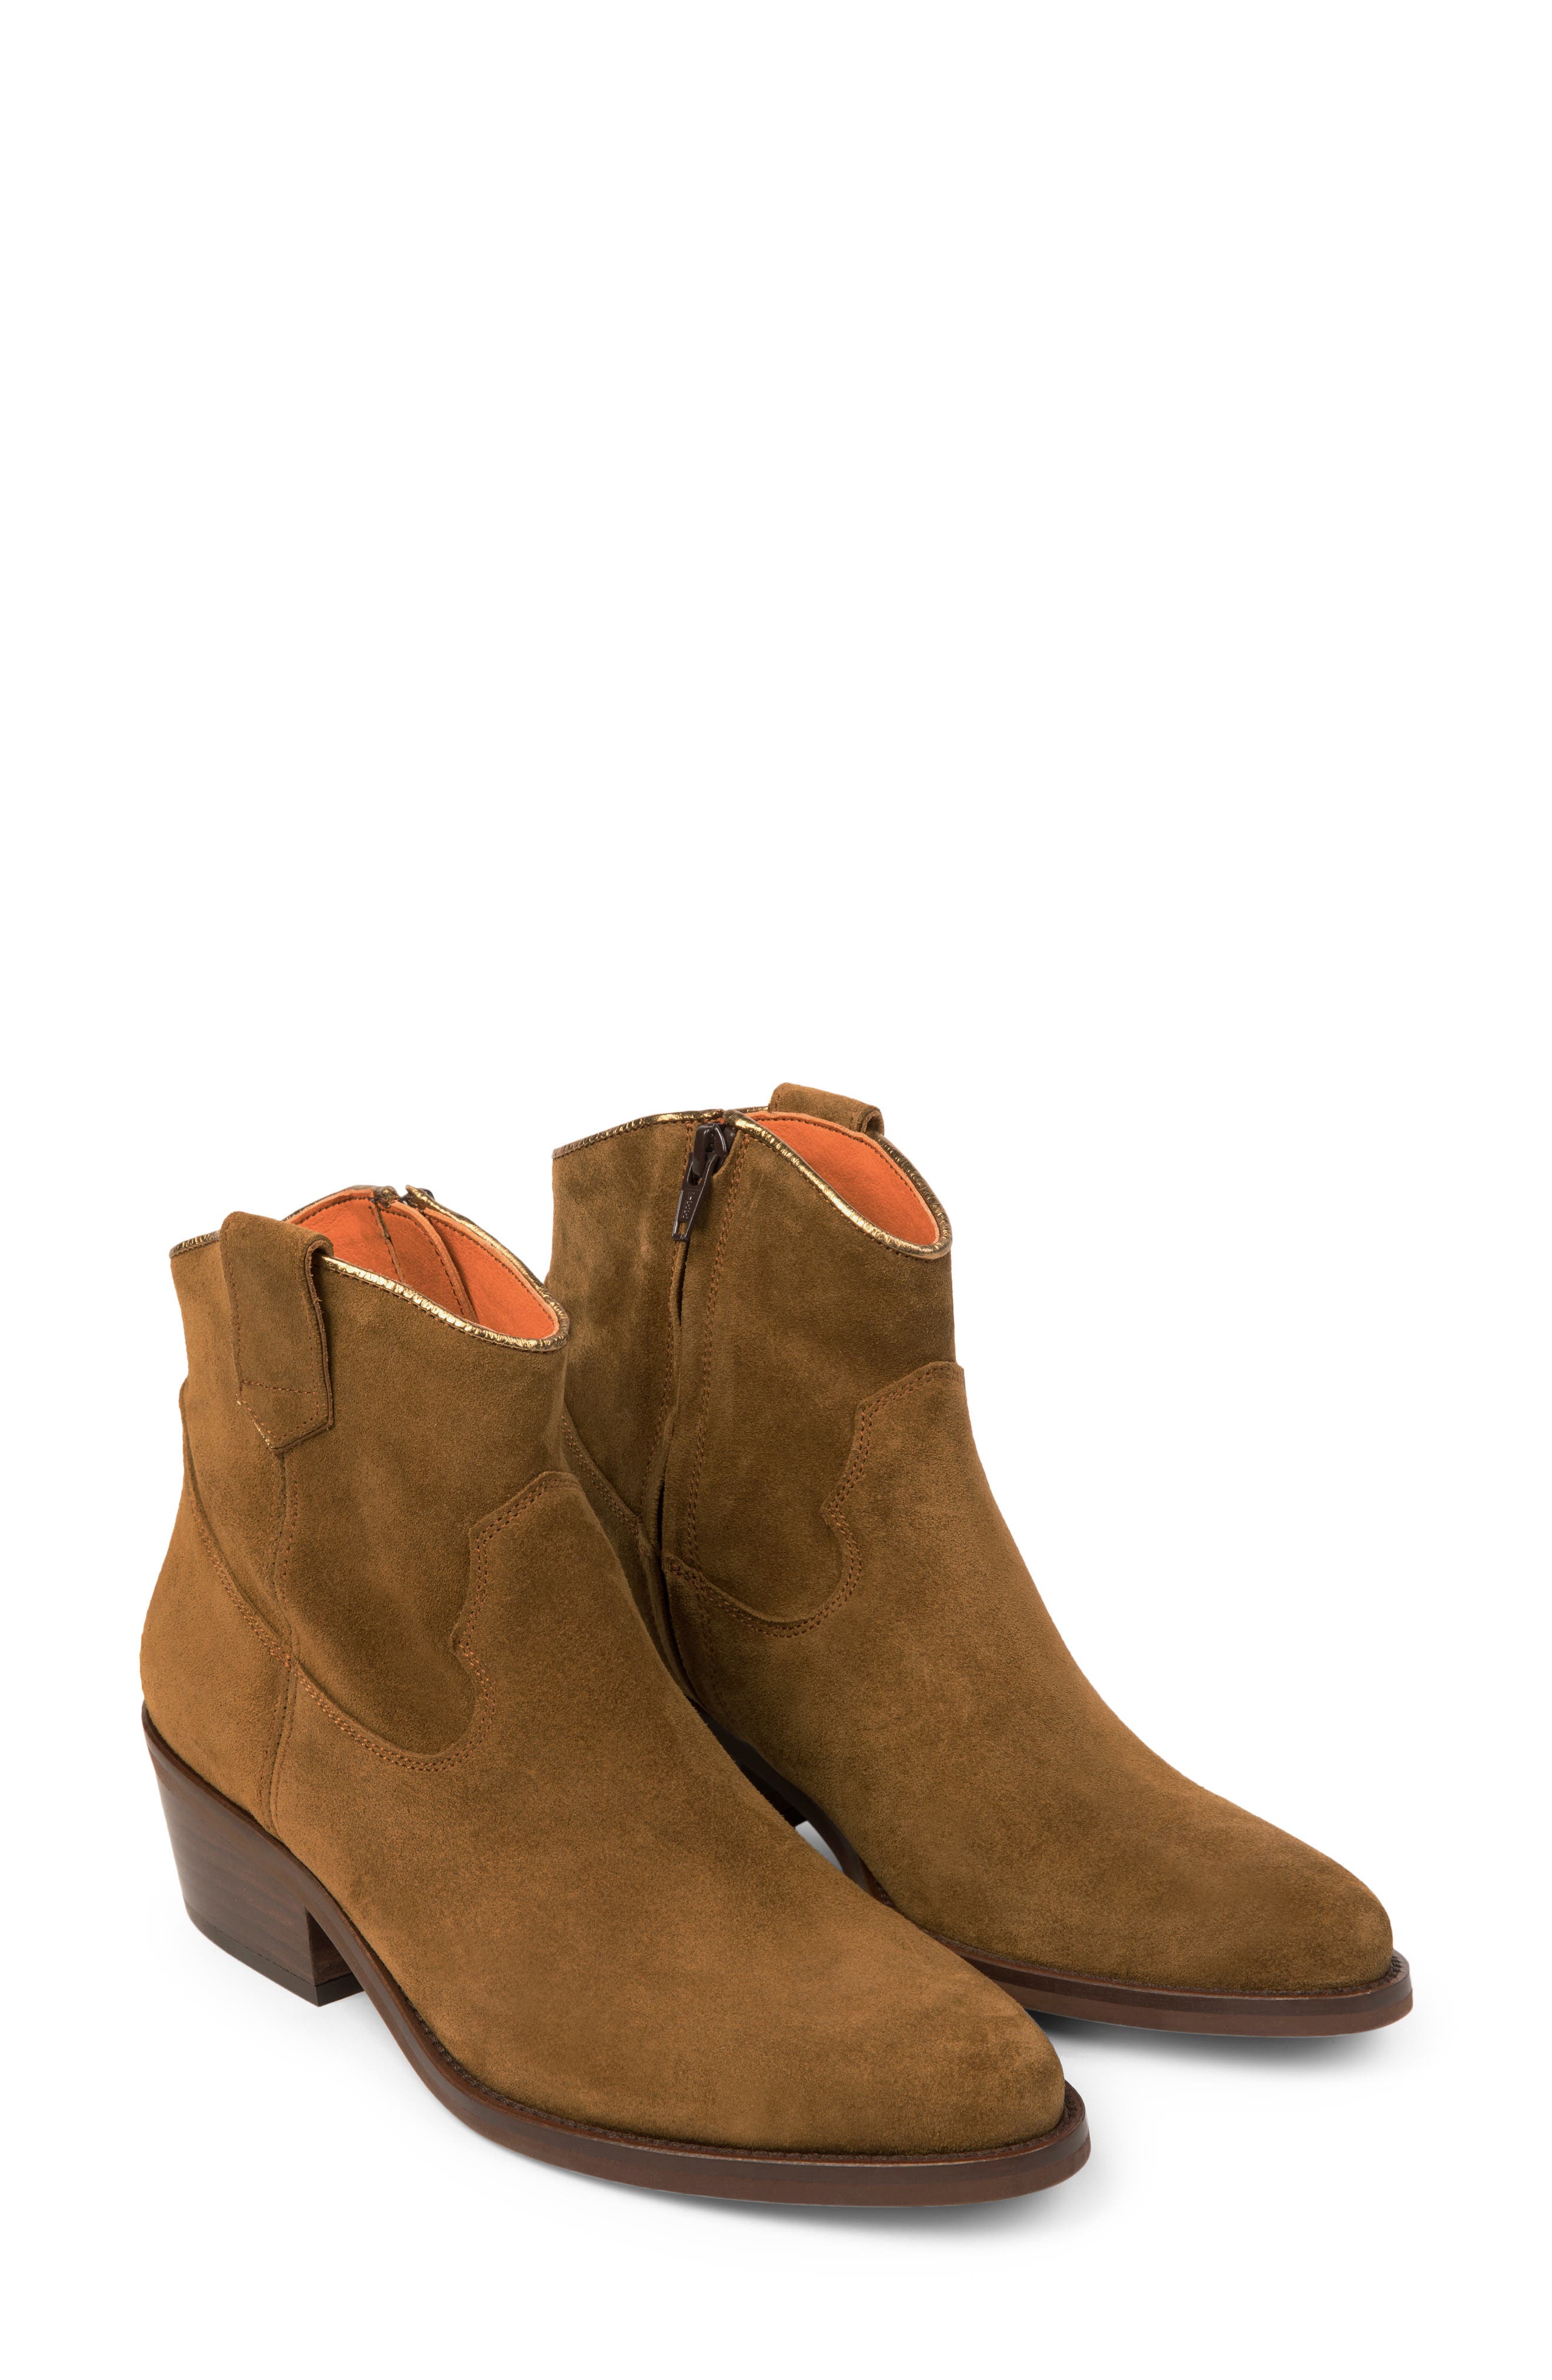 Penelope Chilvers Cassidy Suede Cowboy Boot in Tan